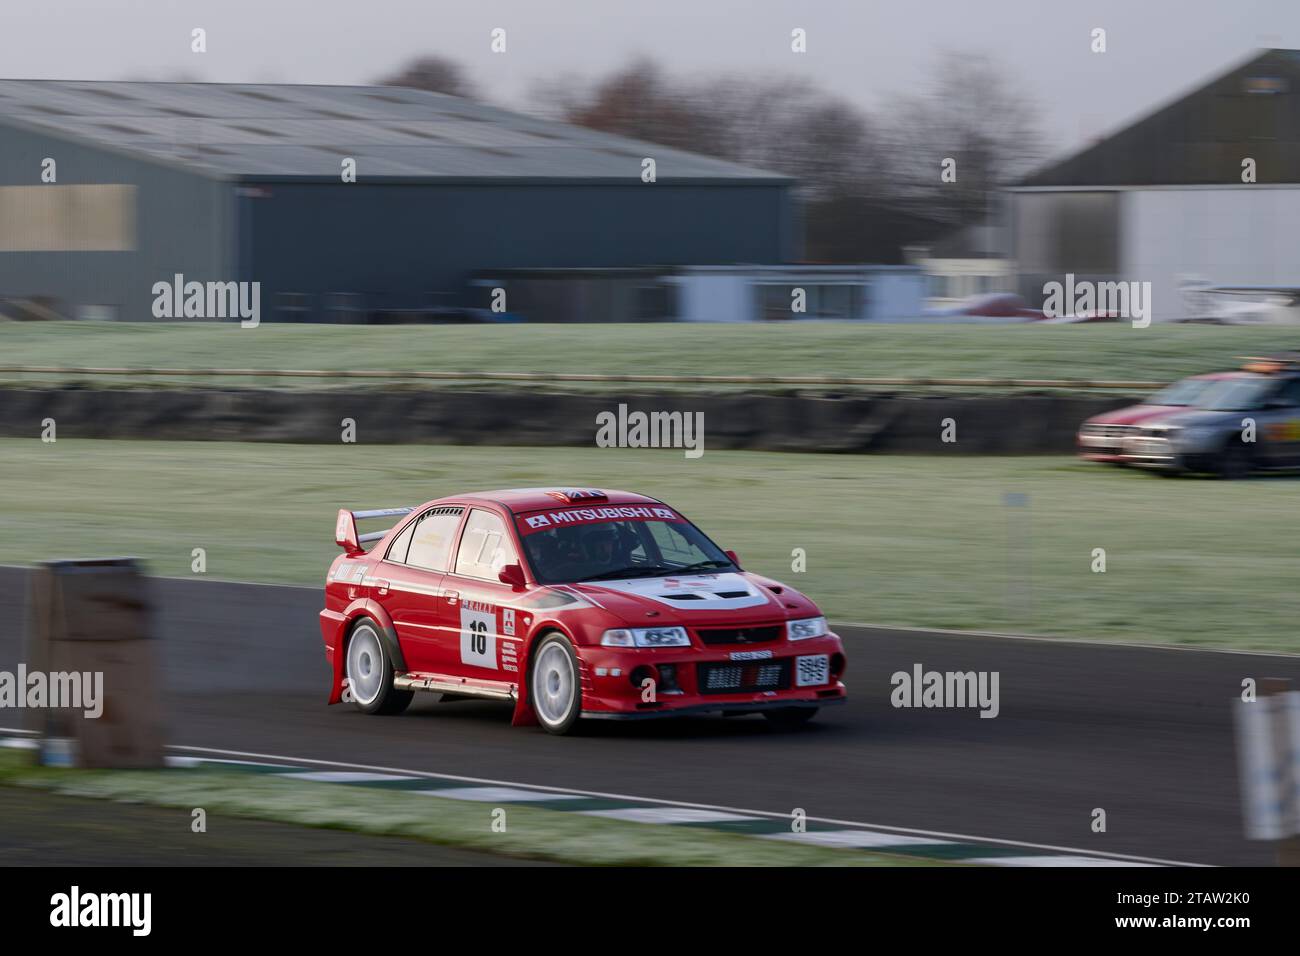 Rally car in action at the Goodwood Motor-racing circuit Stock Photo